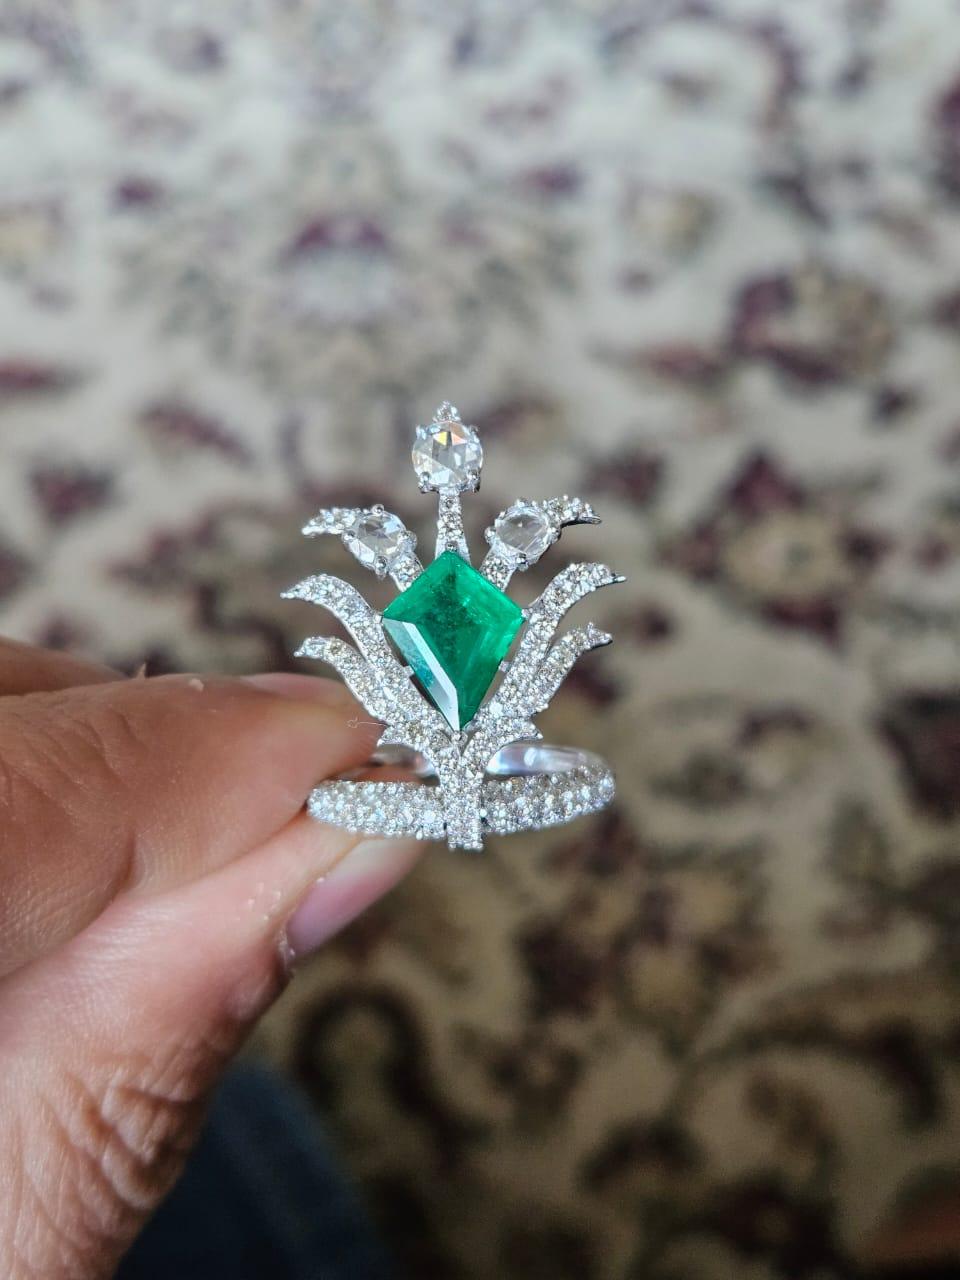 A stunning and gorgeous, Emerald Cocktail Ring set in 18K White Gold & Diamonds. The weight of the kite shaped Emerald is 1.70 carats. The Emerald is completely natural, without any treatment and is of Zambian origin. The weight of the Rose Cut